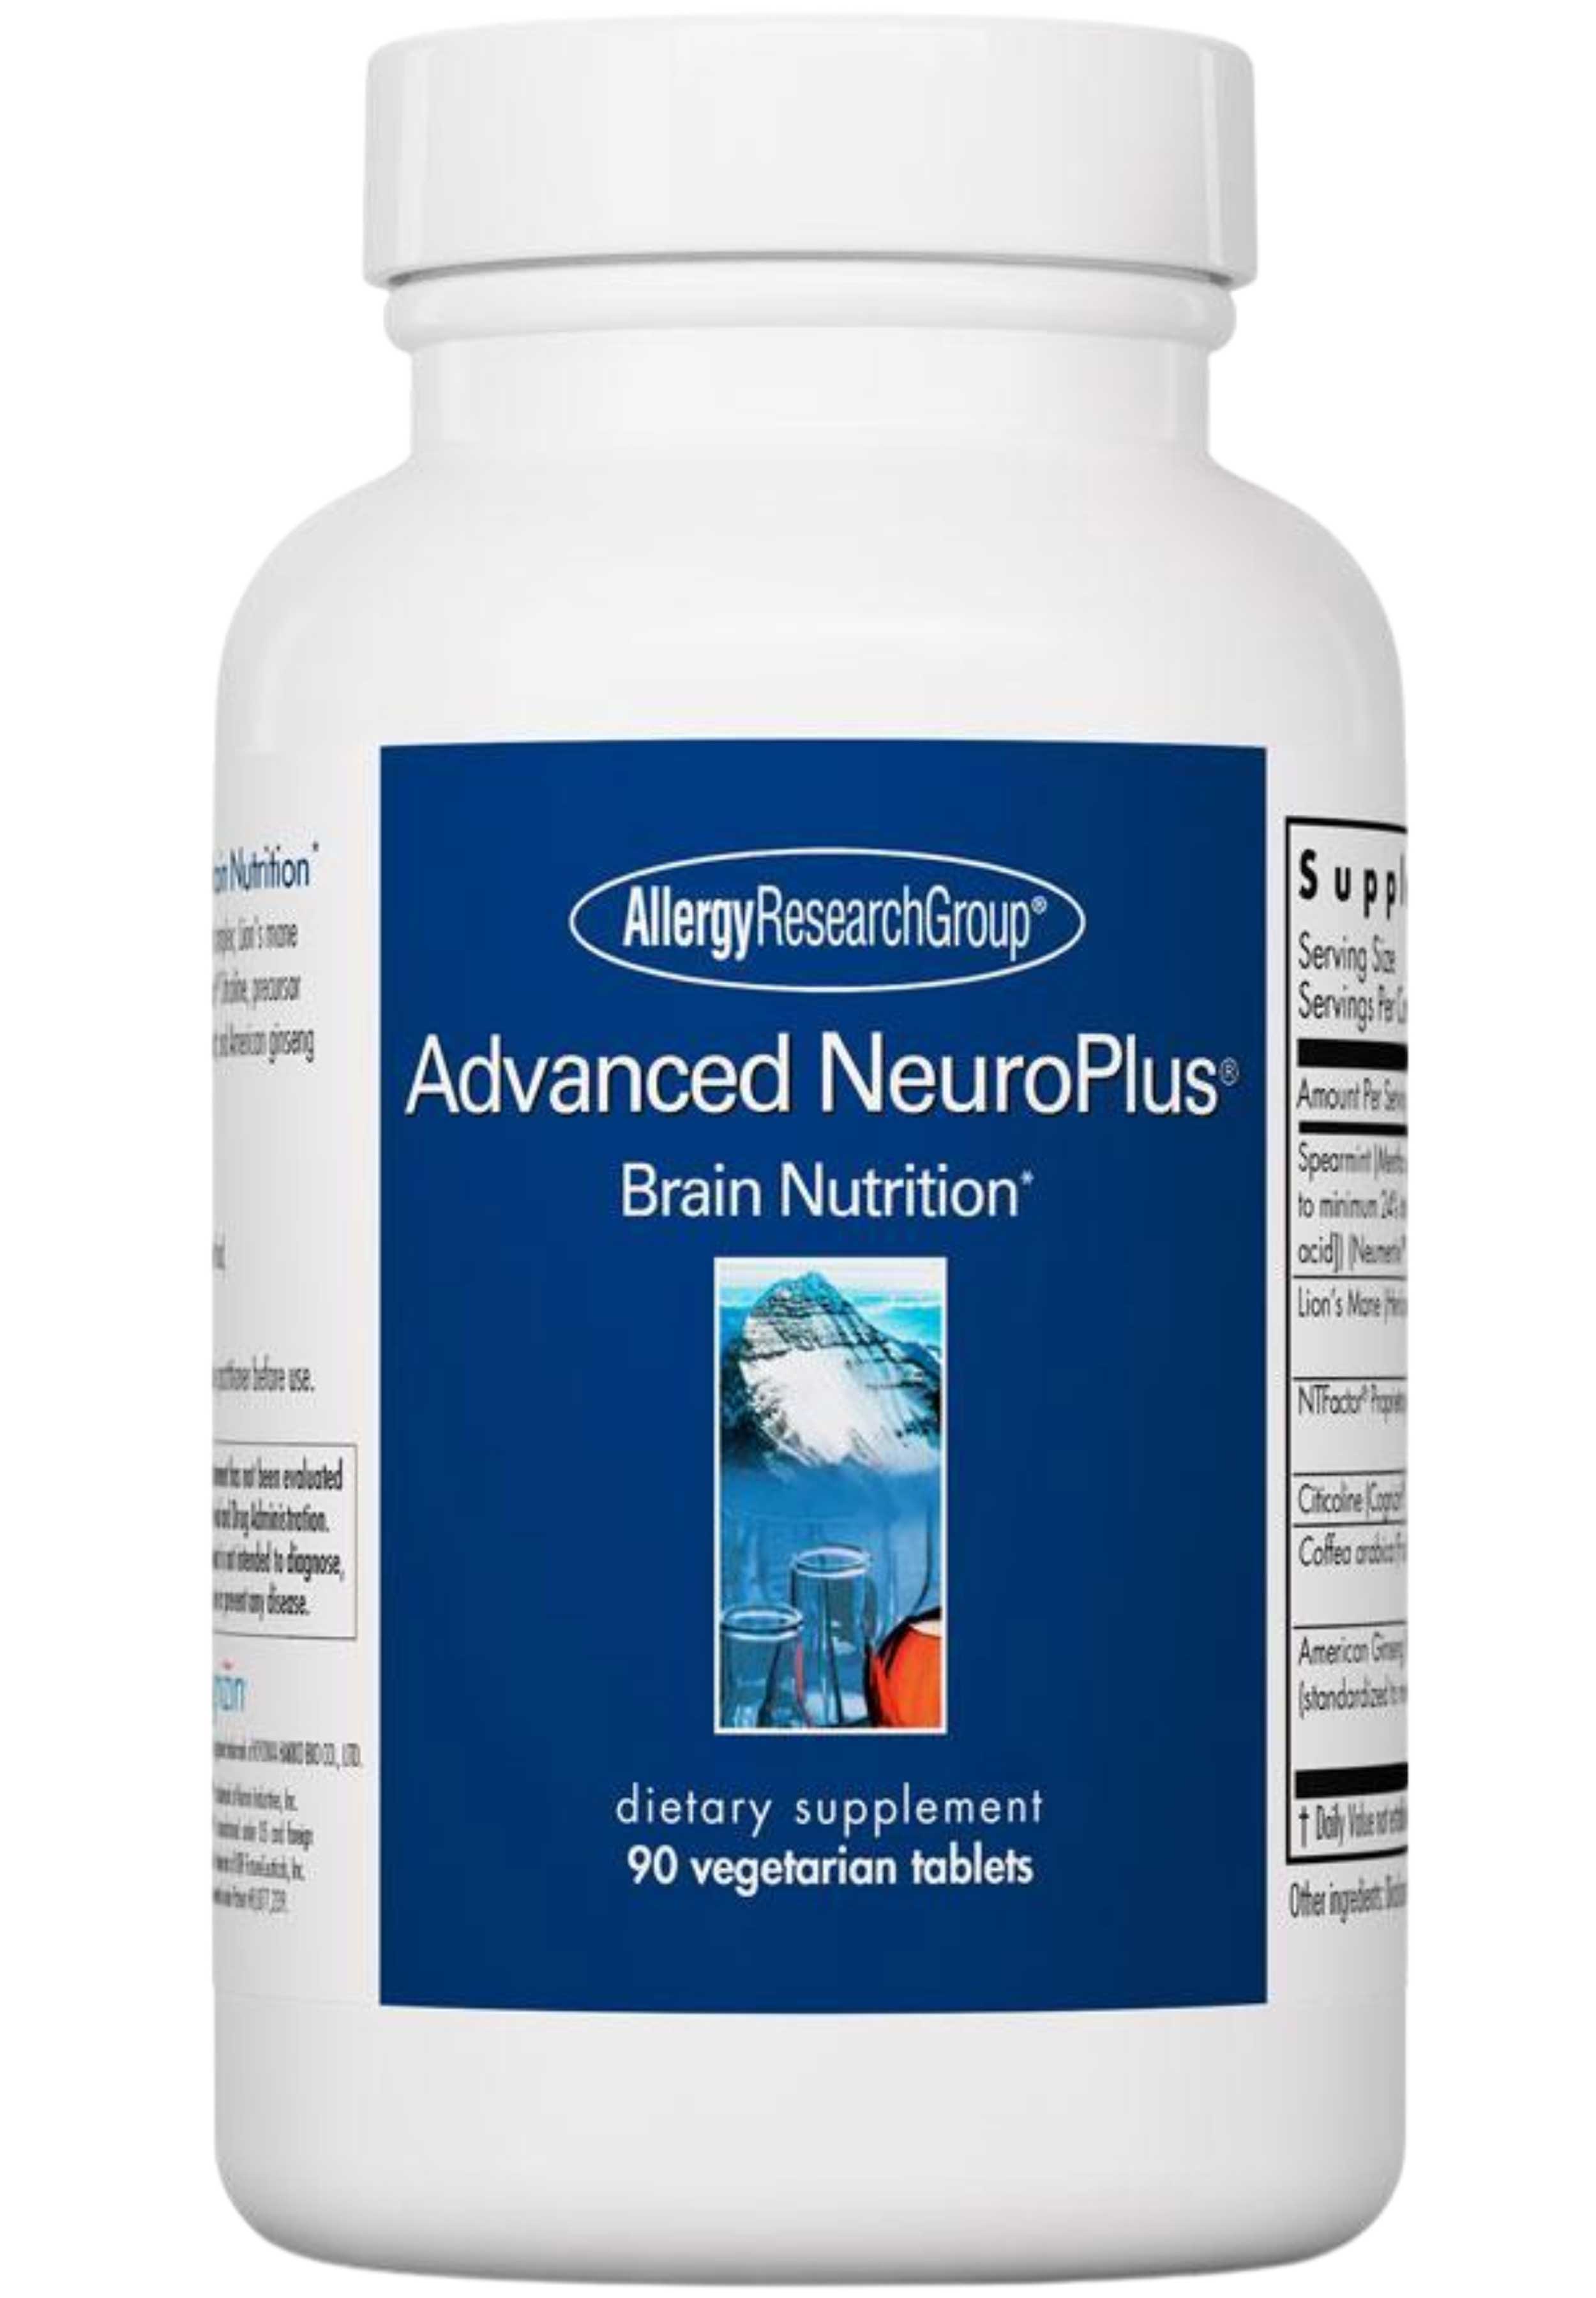 Allergy Research Group Advanced NeuroPlus